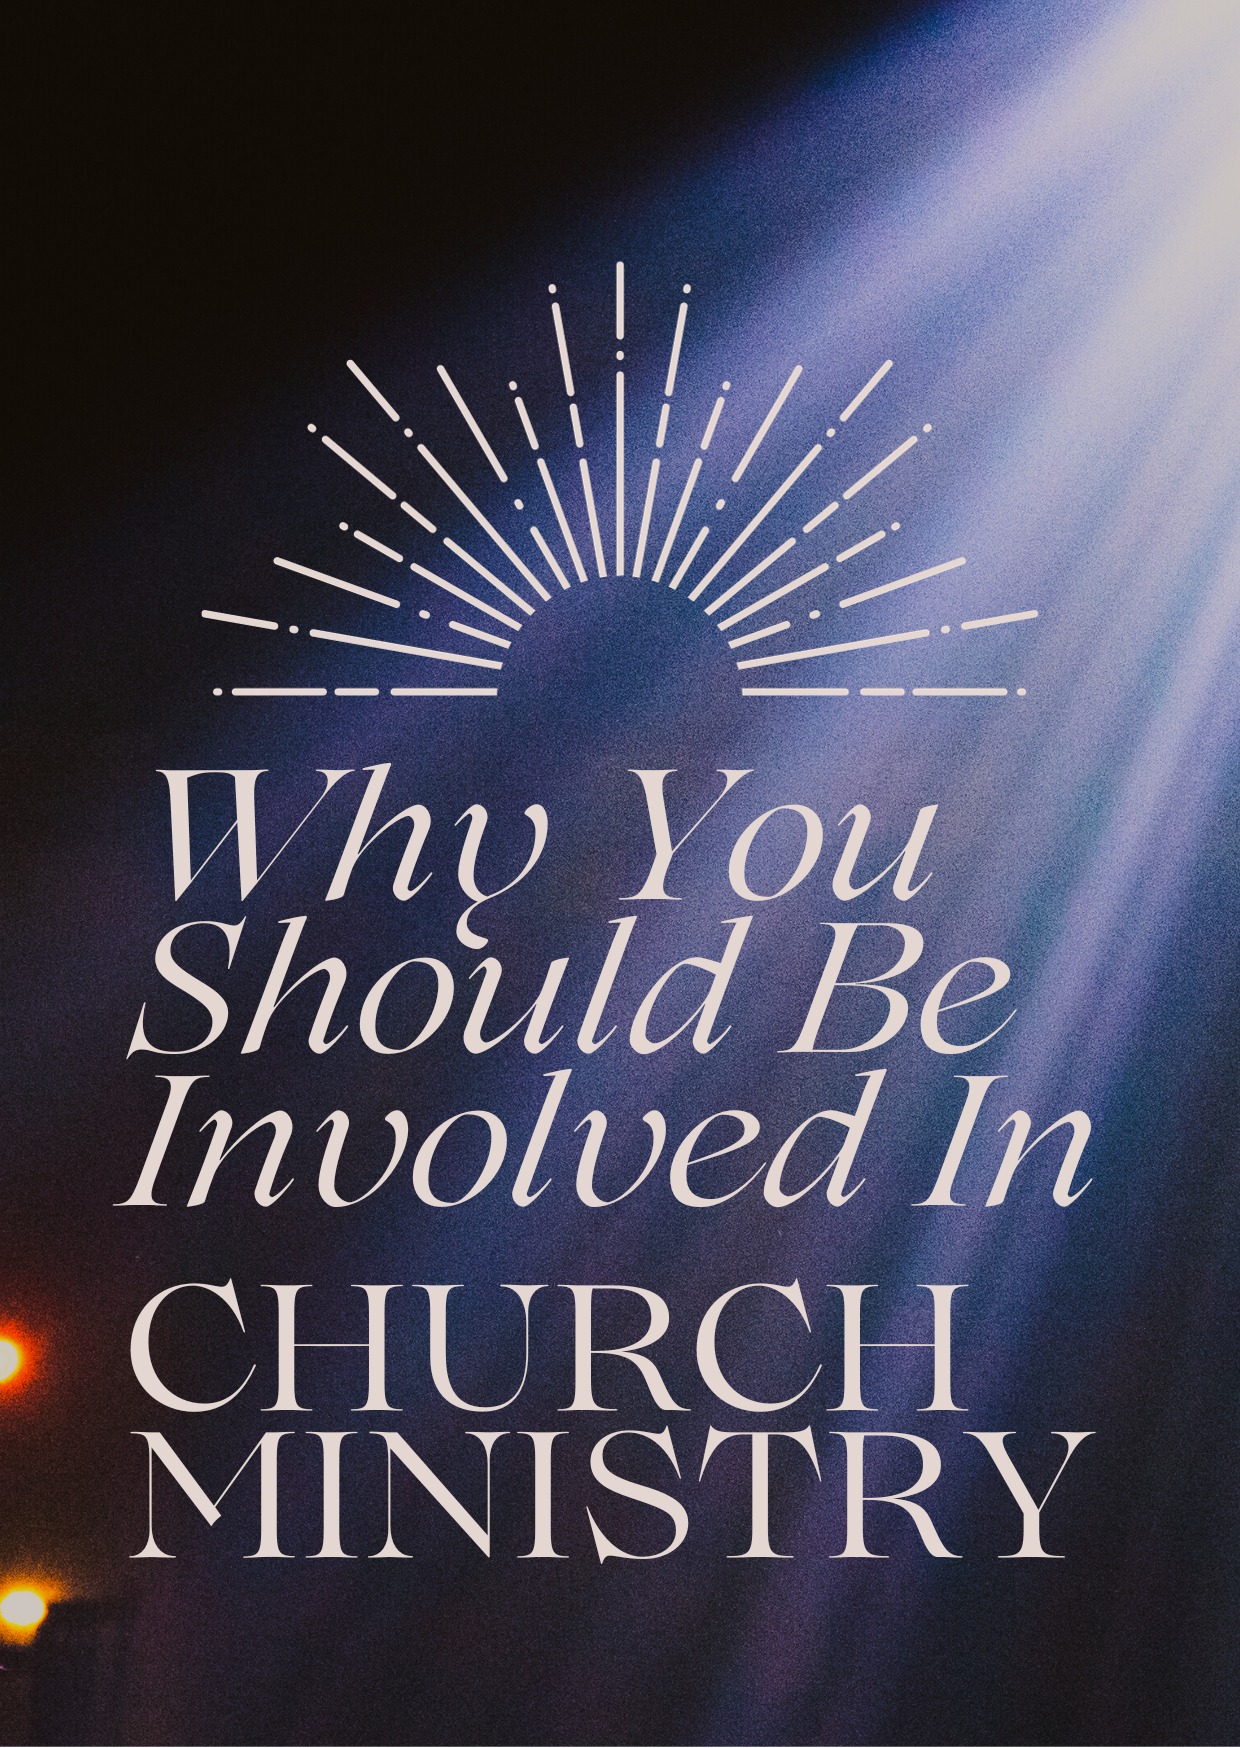 Why You Should Get Involved in a Church Ministry?